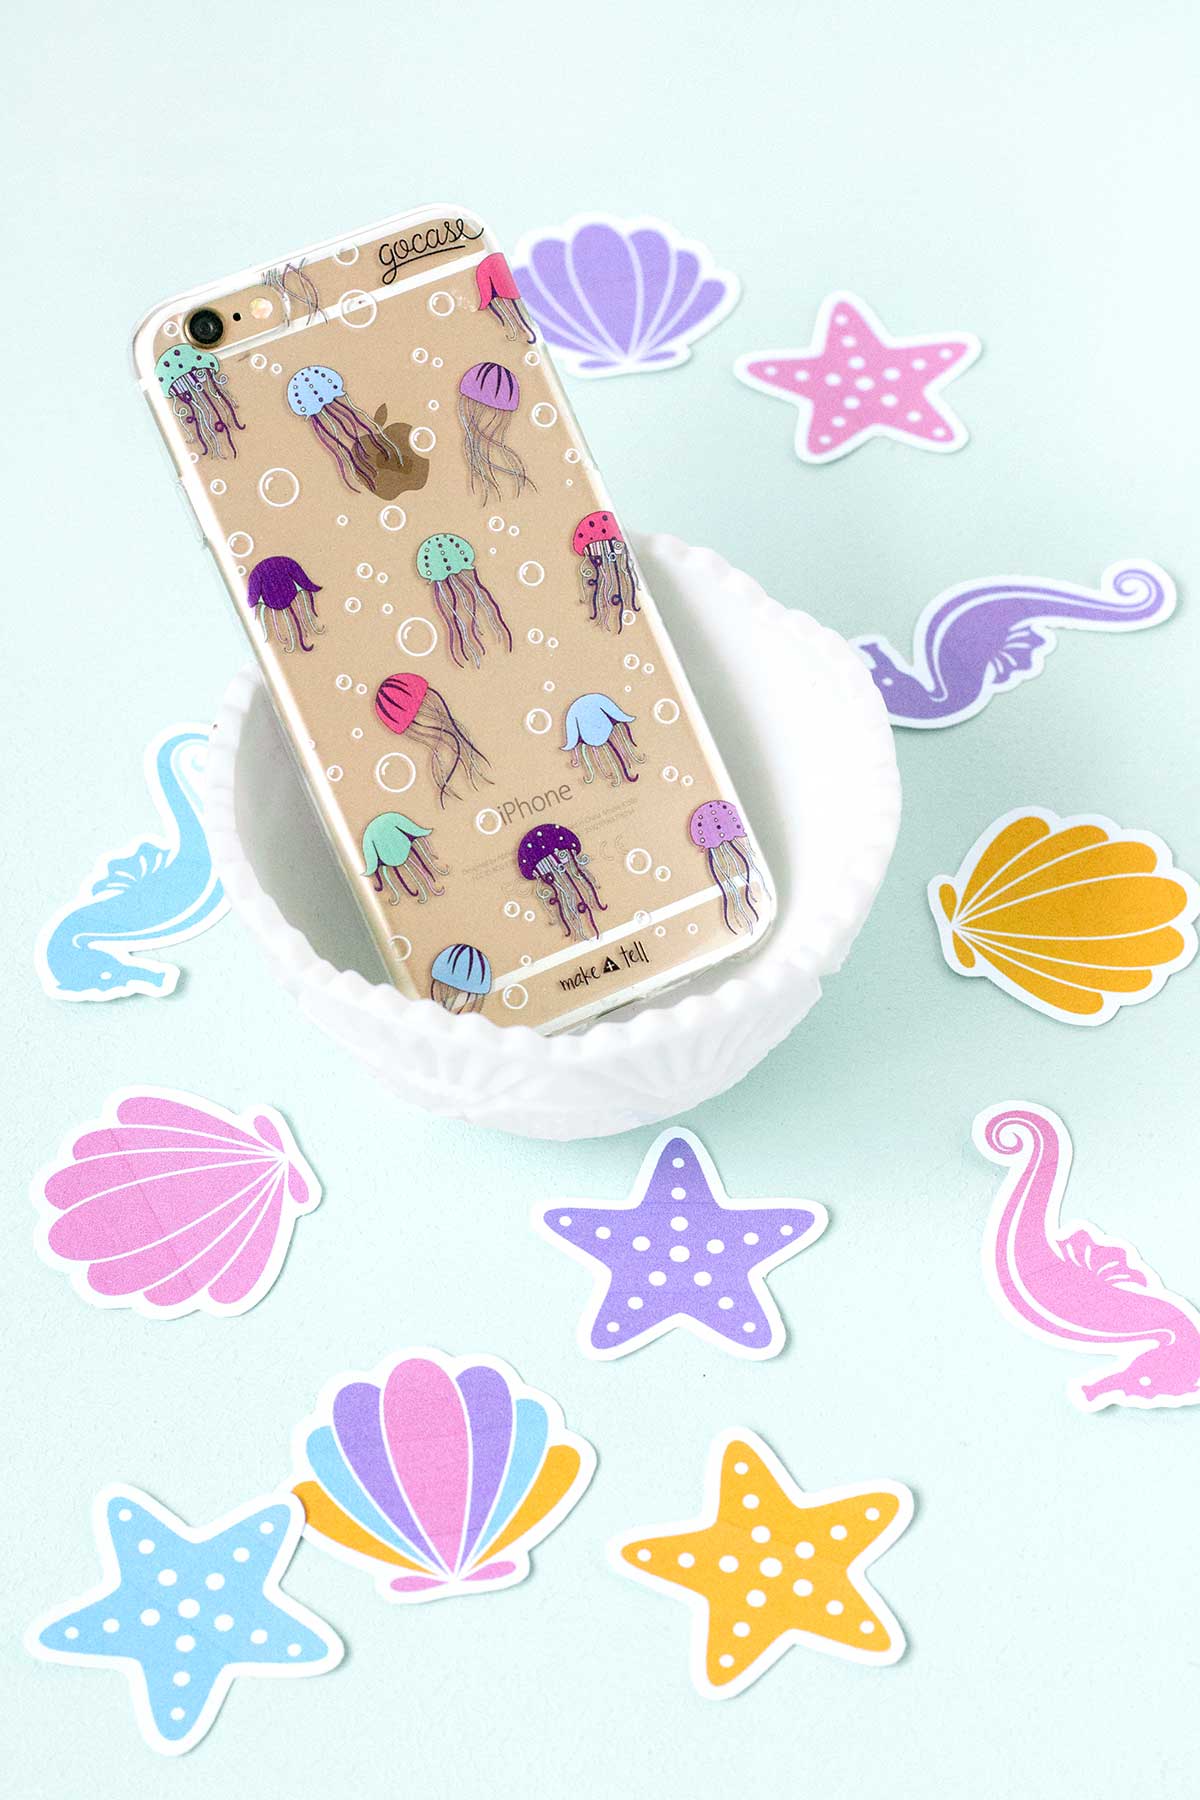 Jellyfish phone case. Design by Make and Tell, available from Gocase